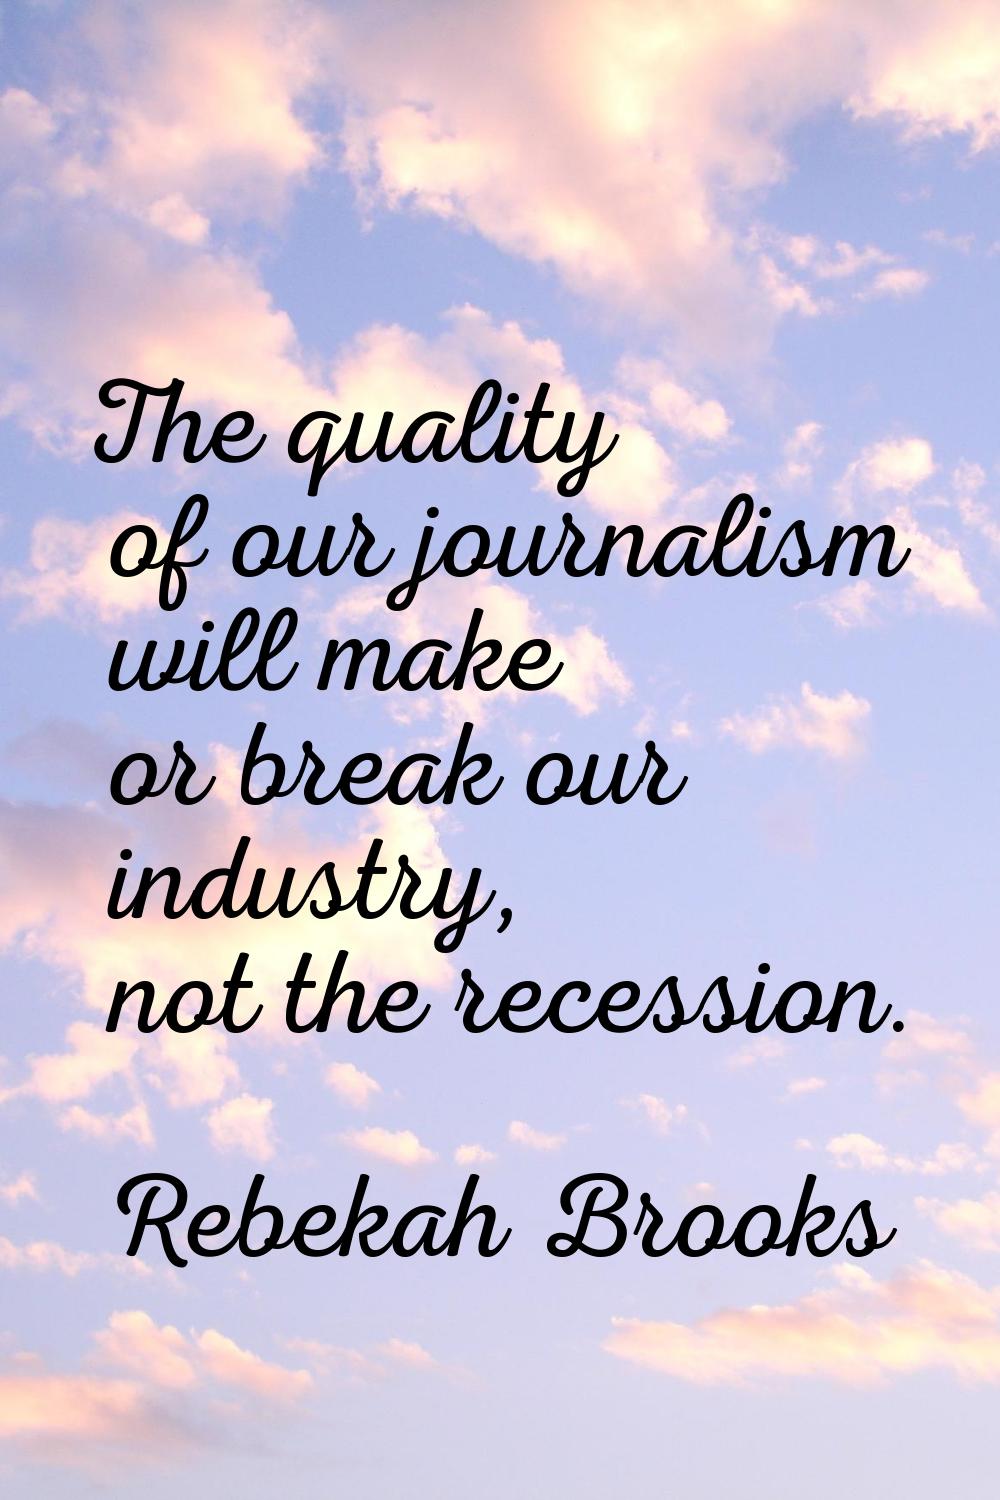 The quality of our journalism will make or break our industry, not the recession.